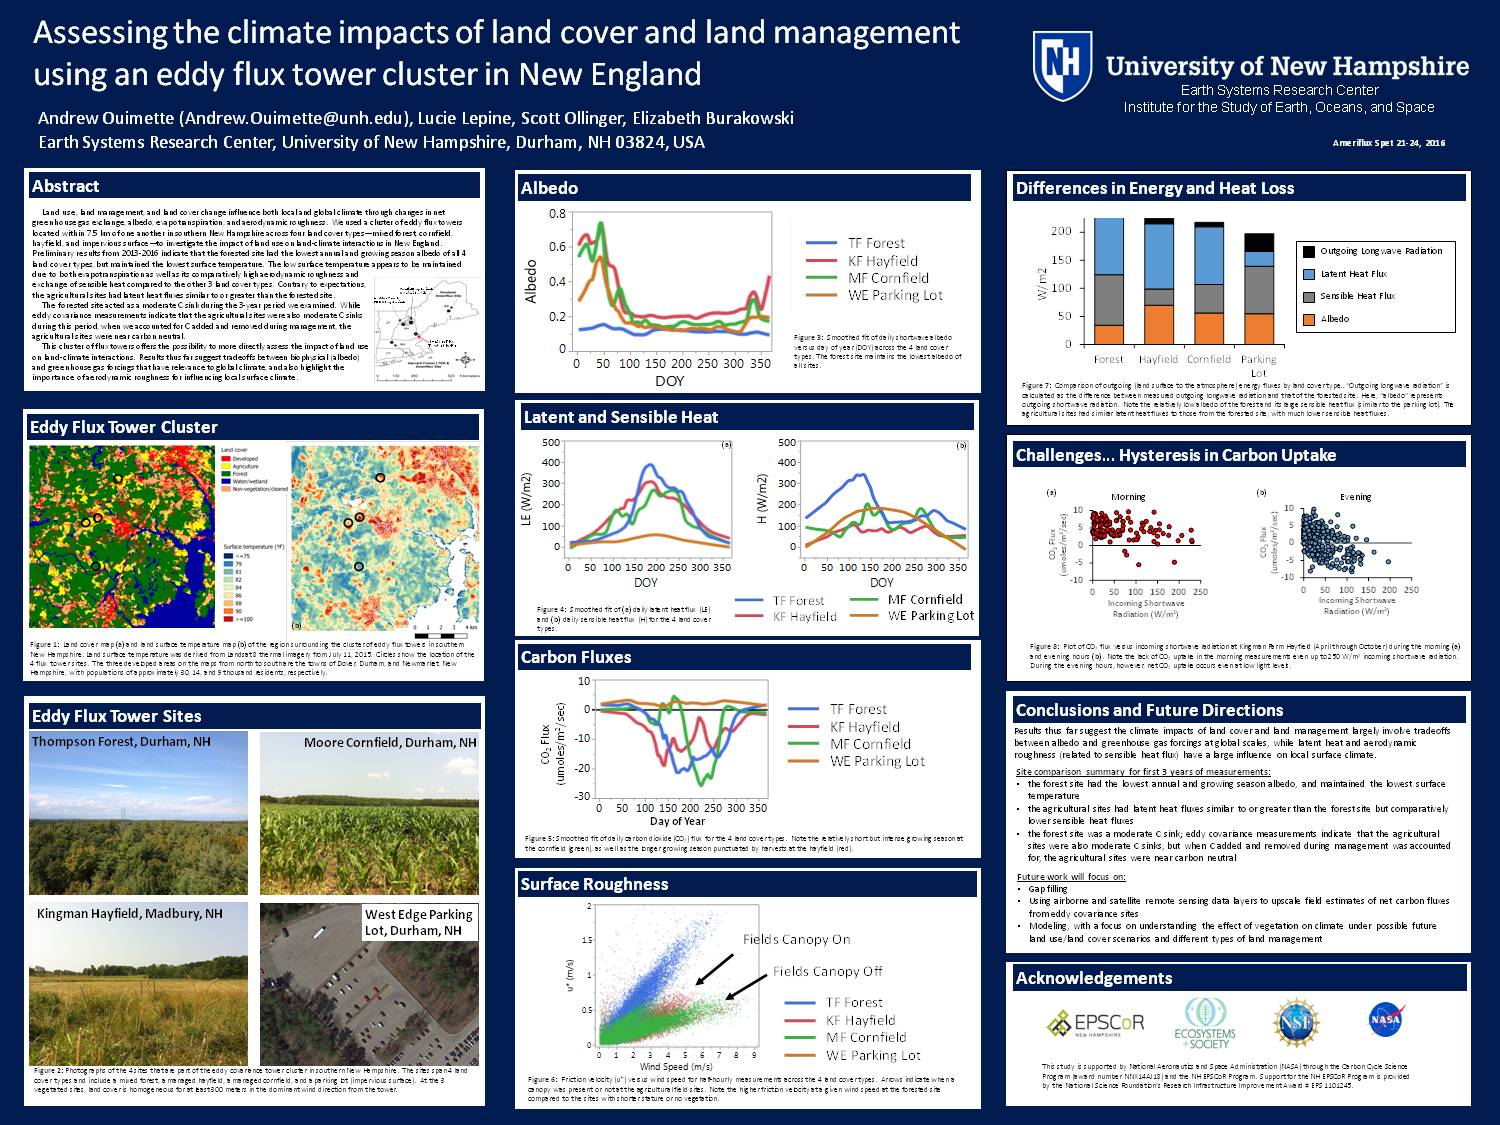 Assessing The Climate Impacts Of Land Cover And Land Management Using An Eddy Flux Tower Cluster In New England by aouimette